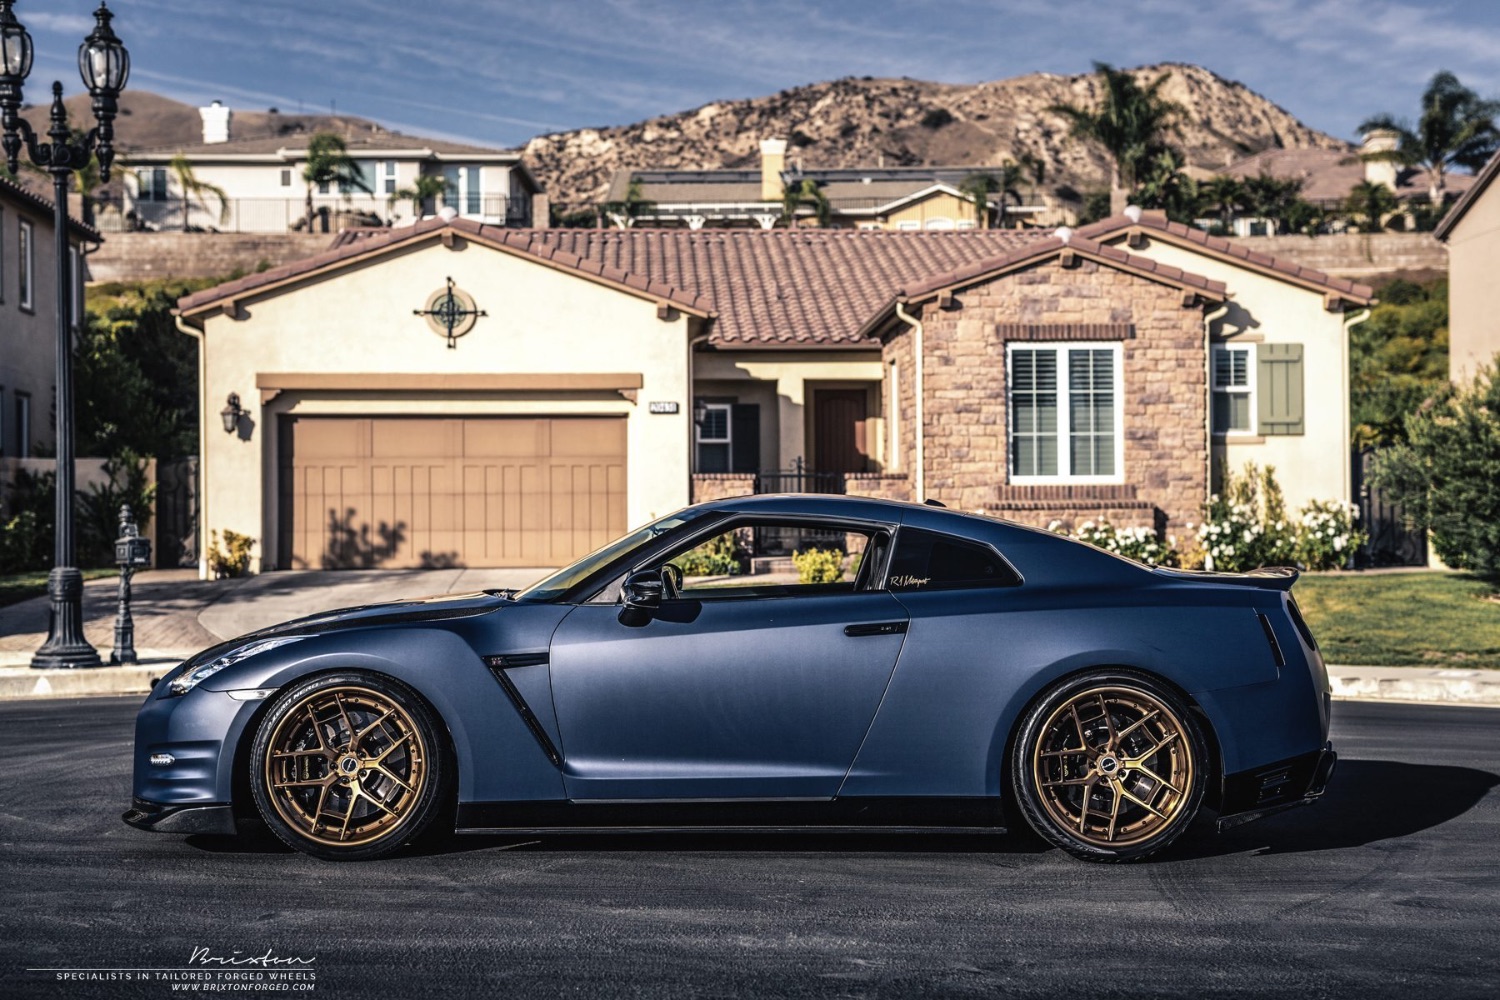 brixton-forged-matte-blue-r35-gtr-21-brixton-forged-wr5-targa-series-3-piece-forged-wheels-olympic-bronze-8-1800x1200